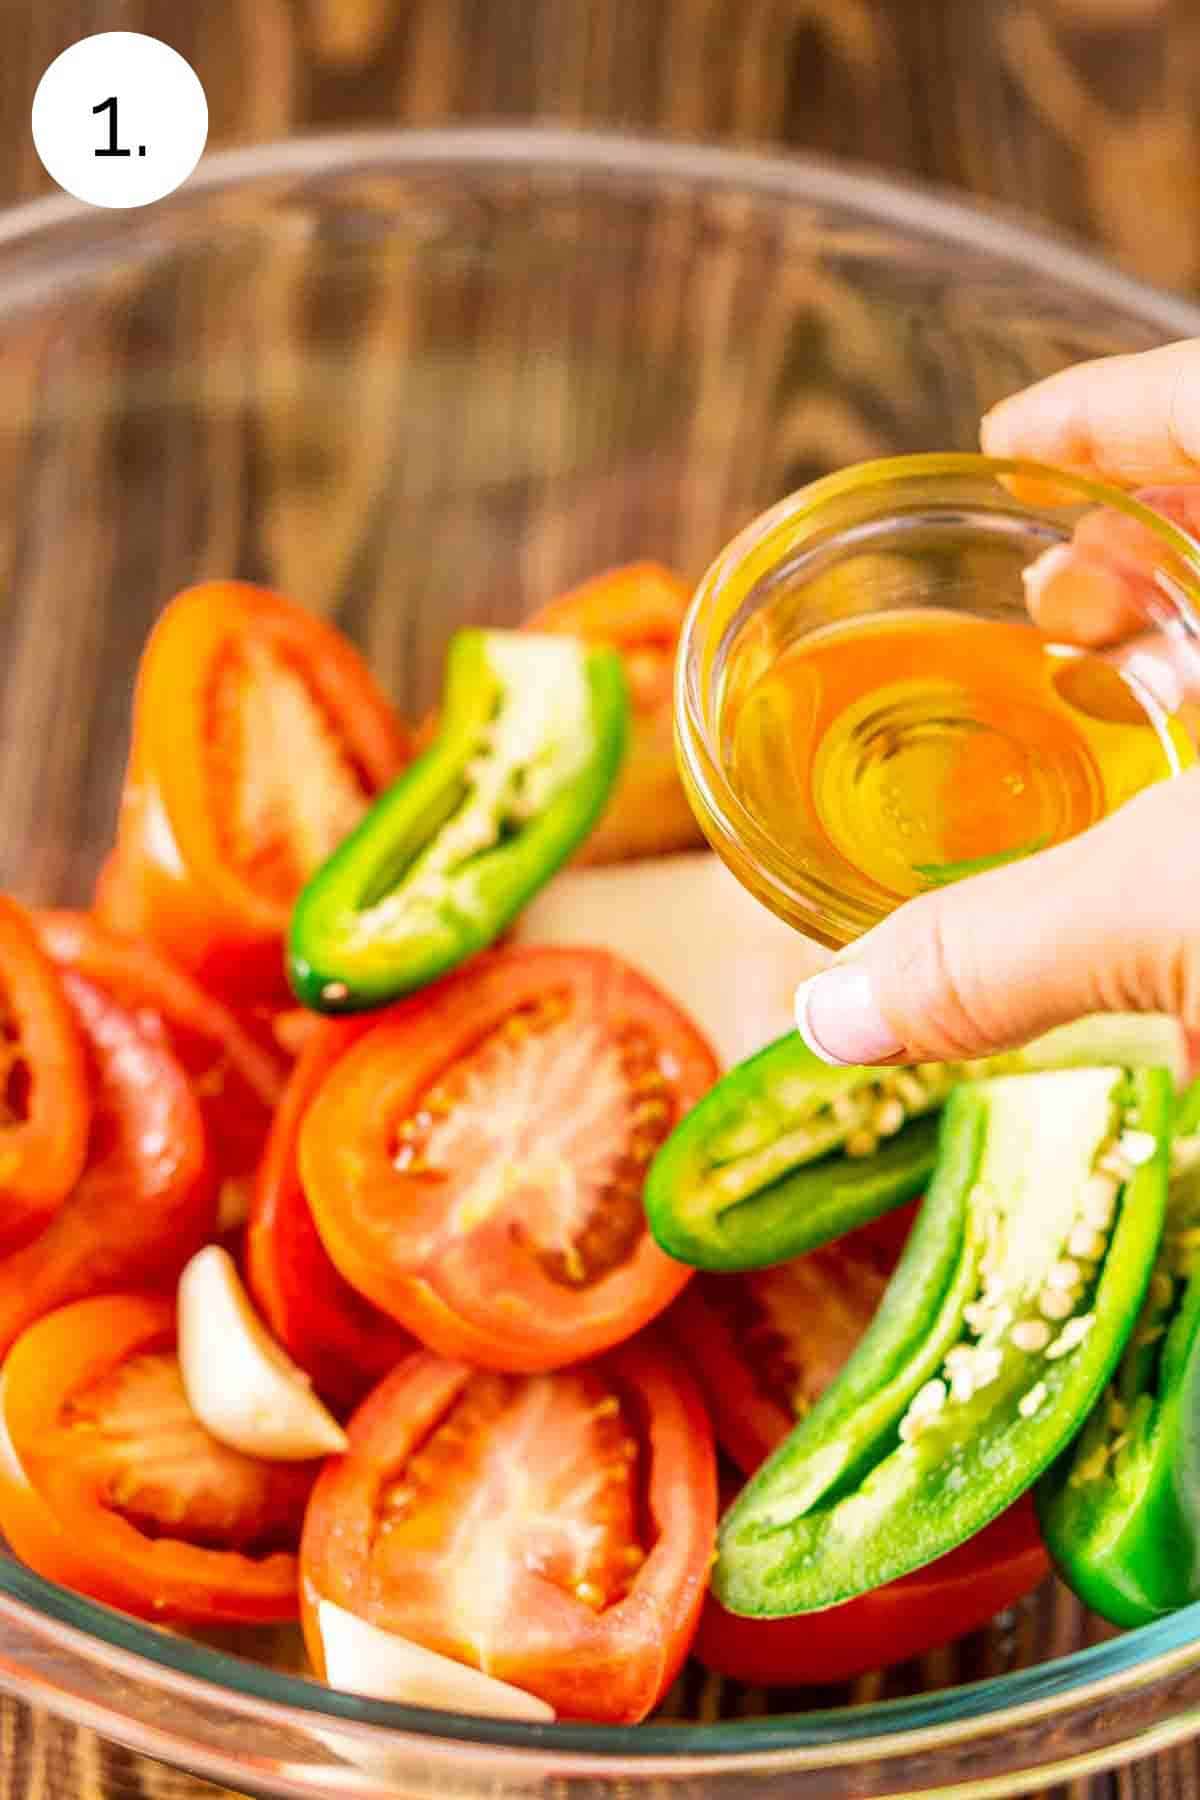 A hand pouring a small bowl of olive oil over the vegetables in a large glass mixing bowl.